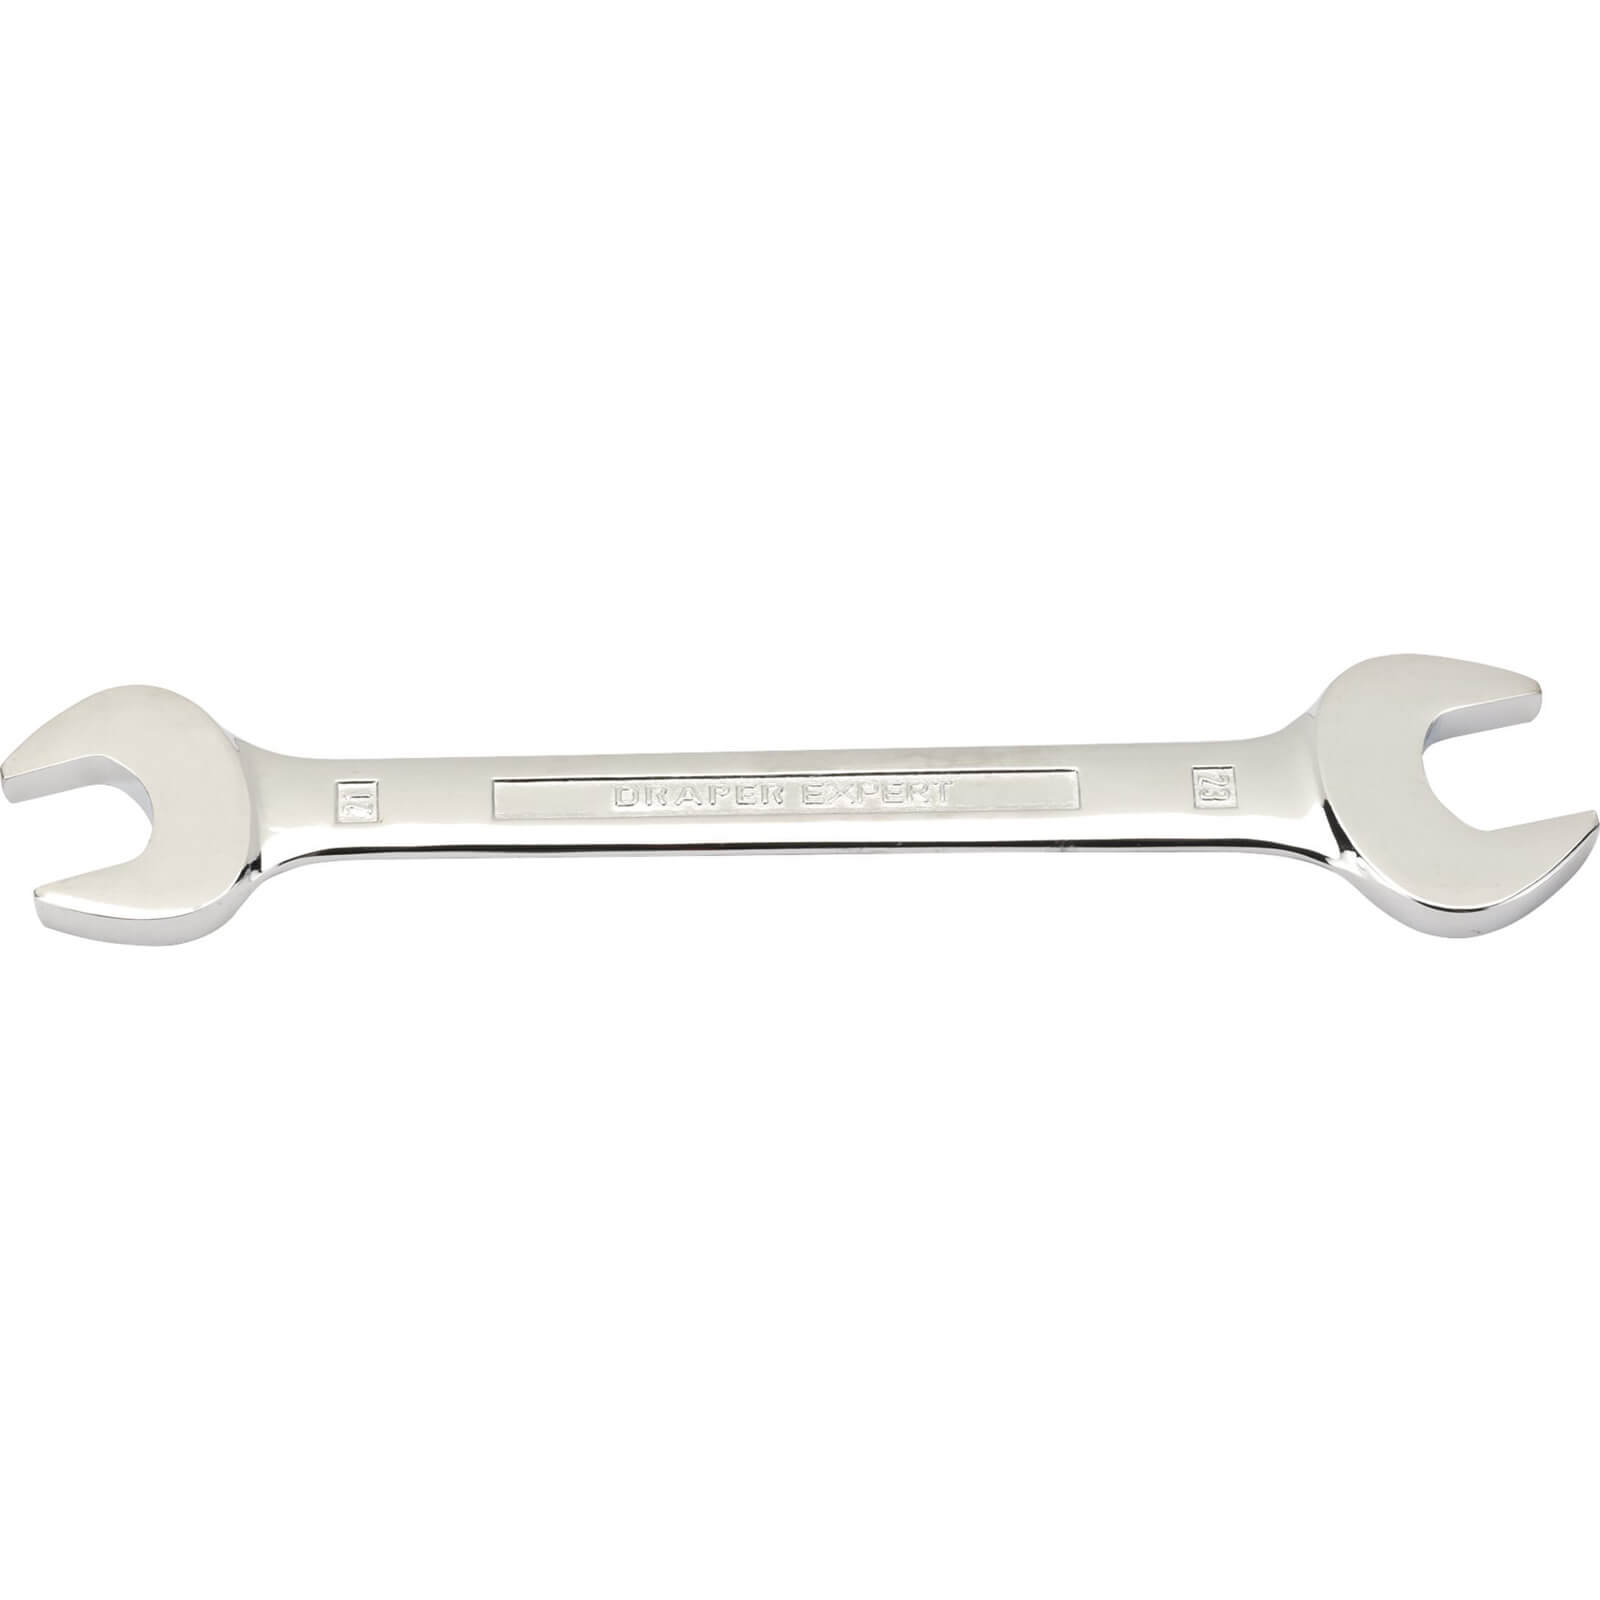 Photos - Wrench Draper Expert Double Open Ended Spanner Metric 21mm x 23mm 5055MM 